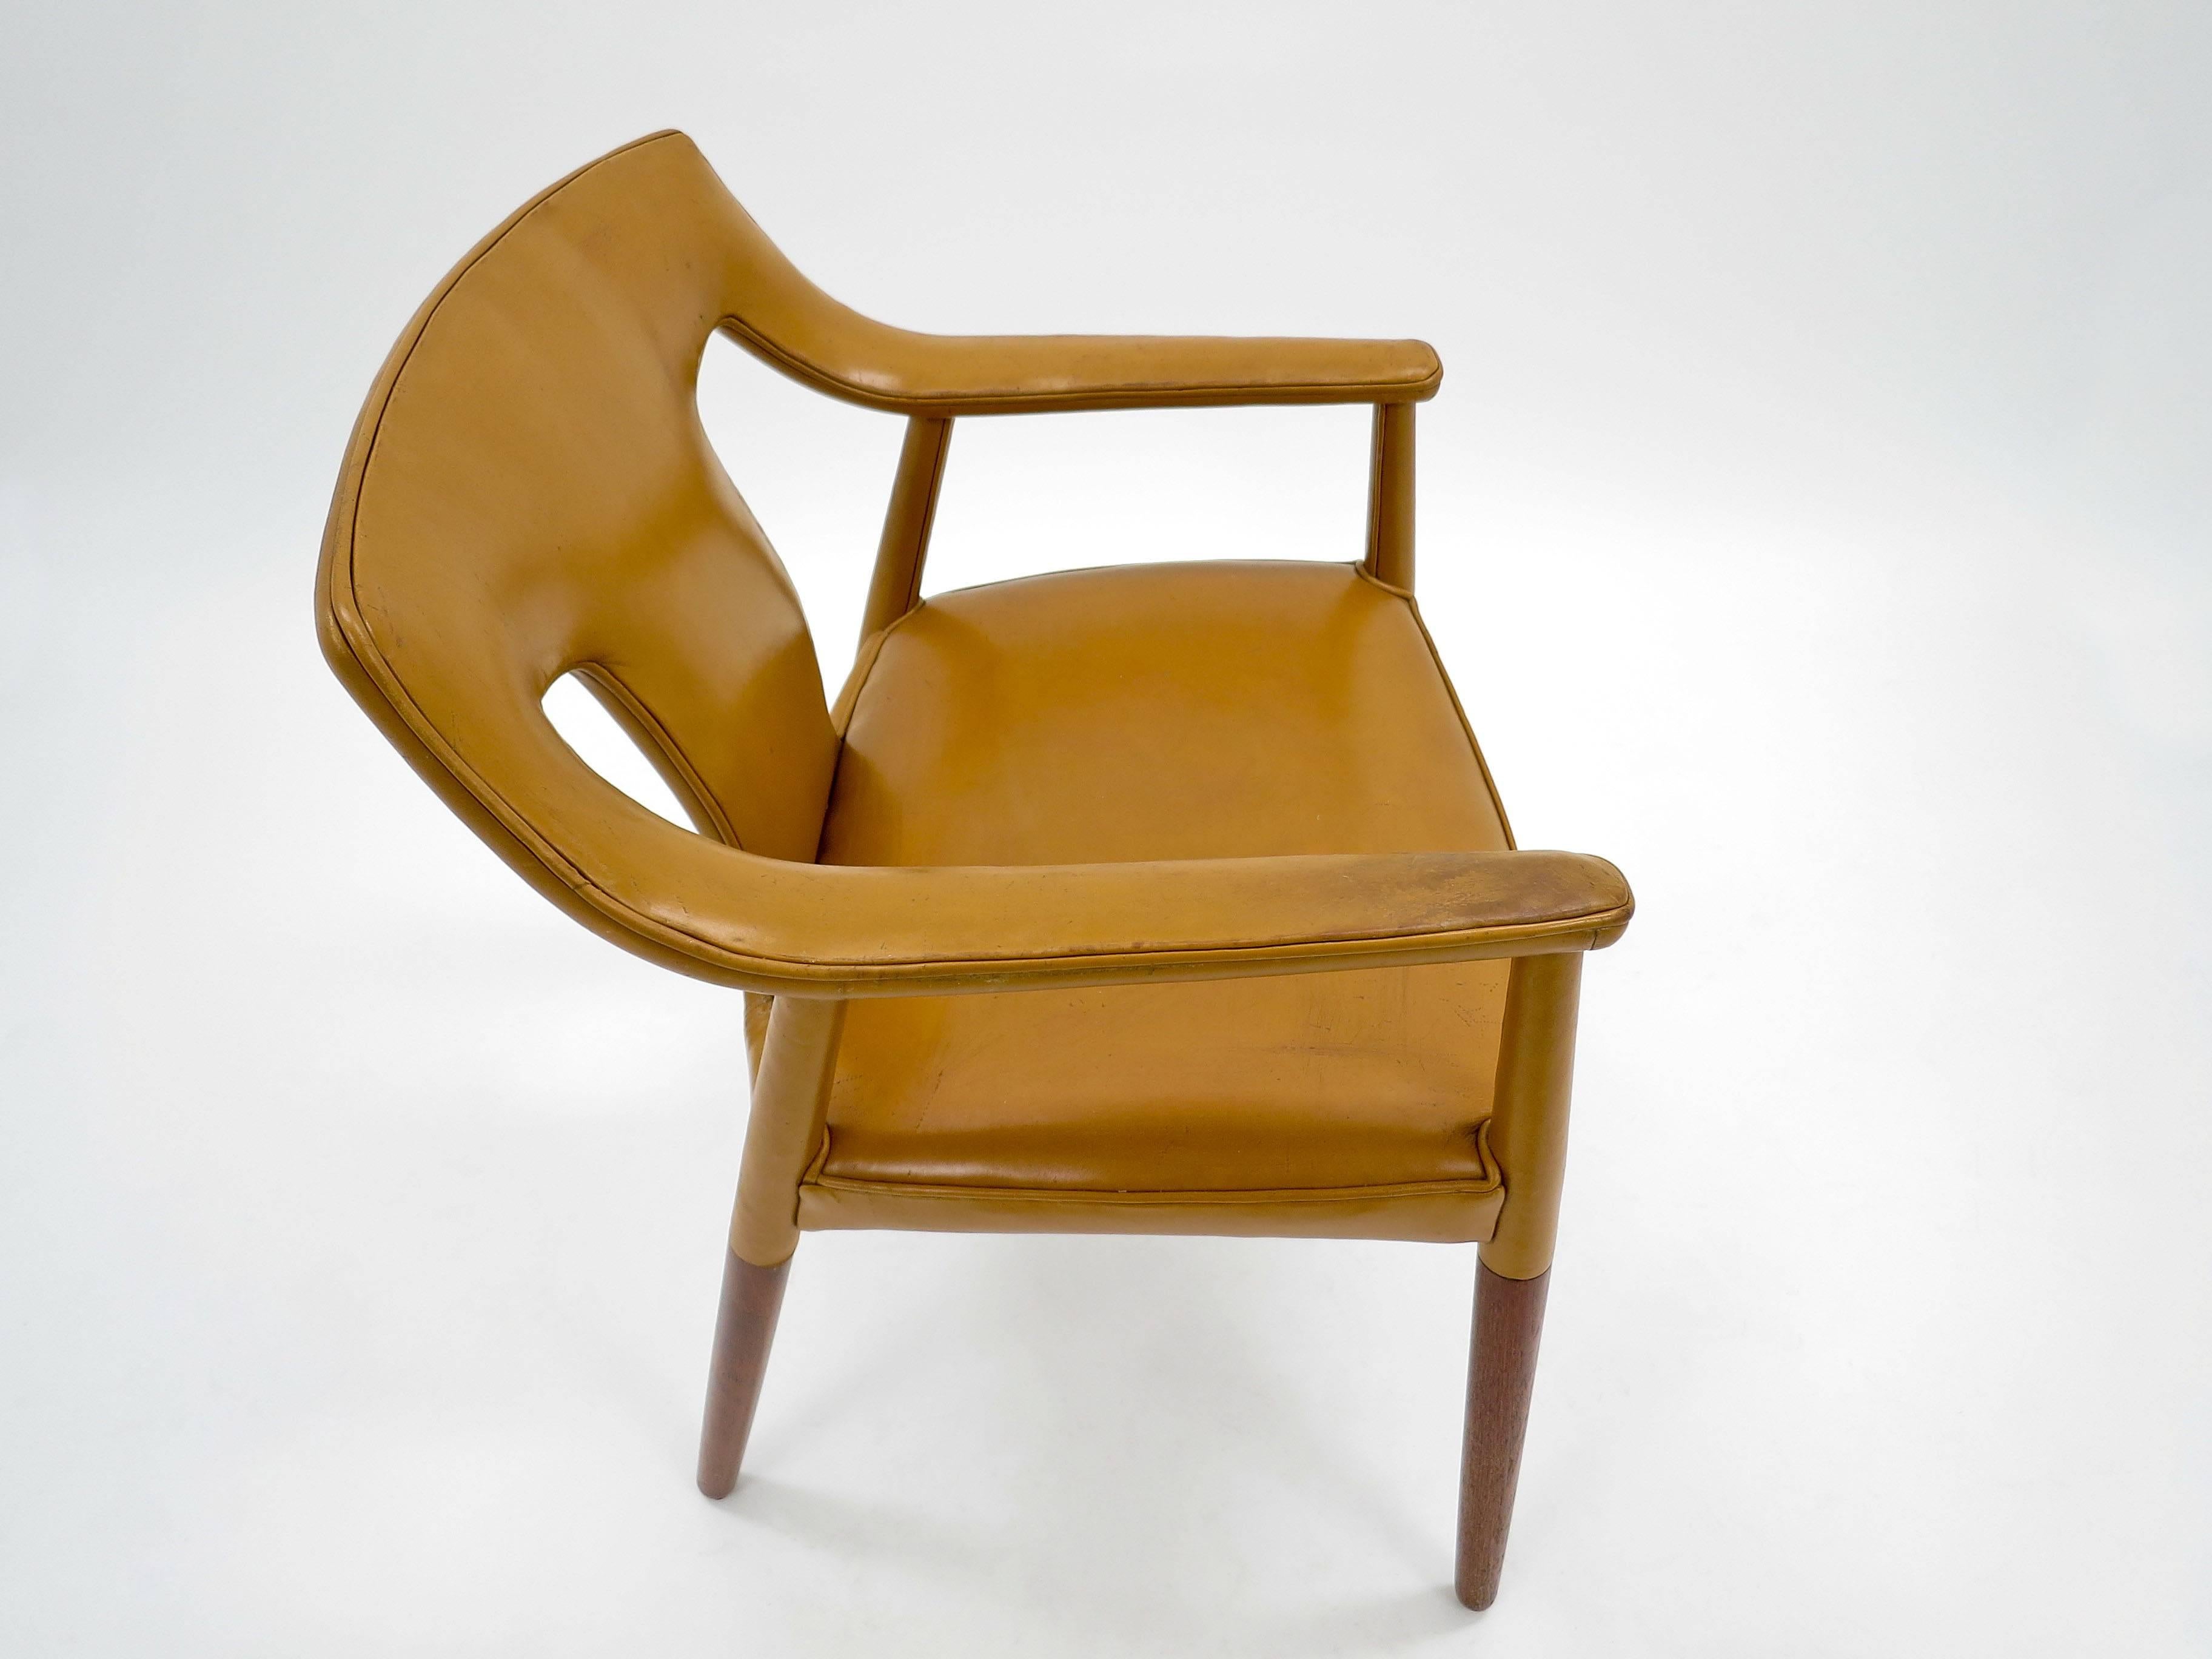 Bender Madsen and Larsen Armchair Leather and Teak, Danish, 1950s For Sale 1